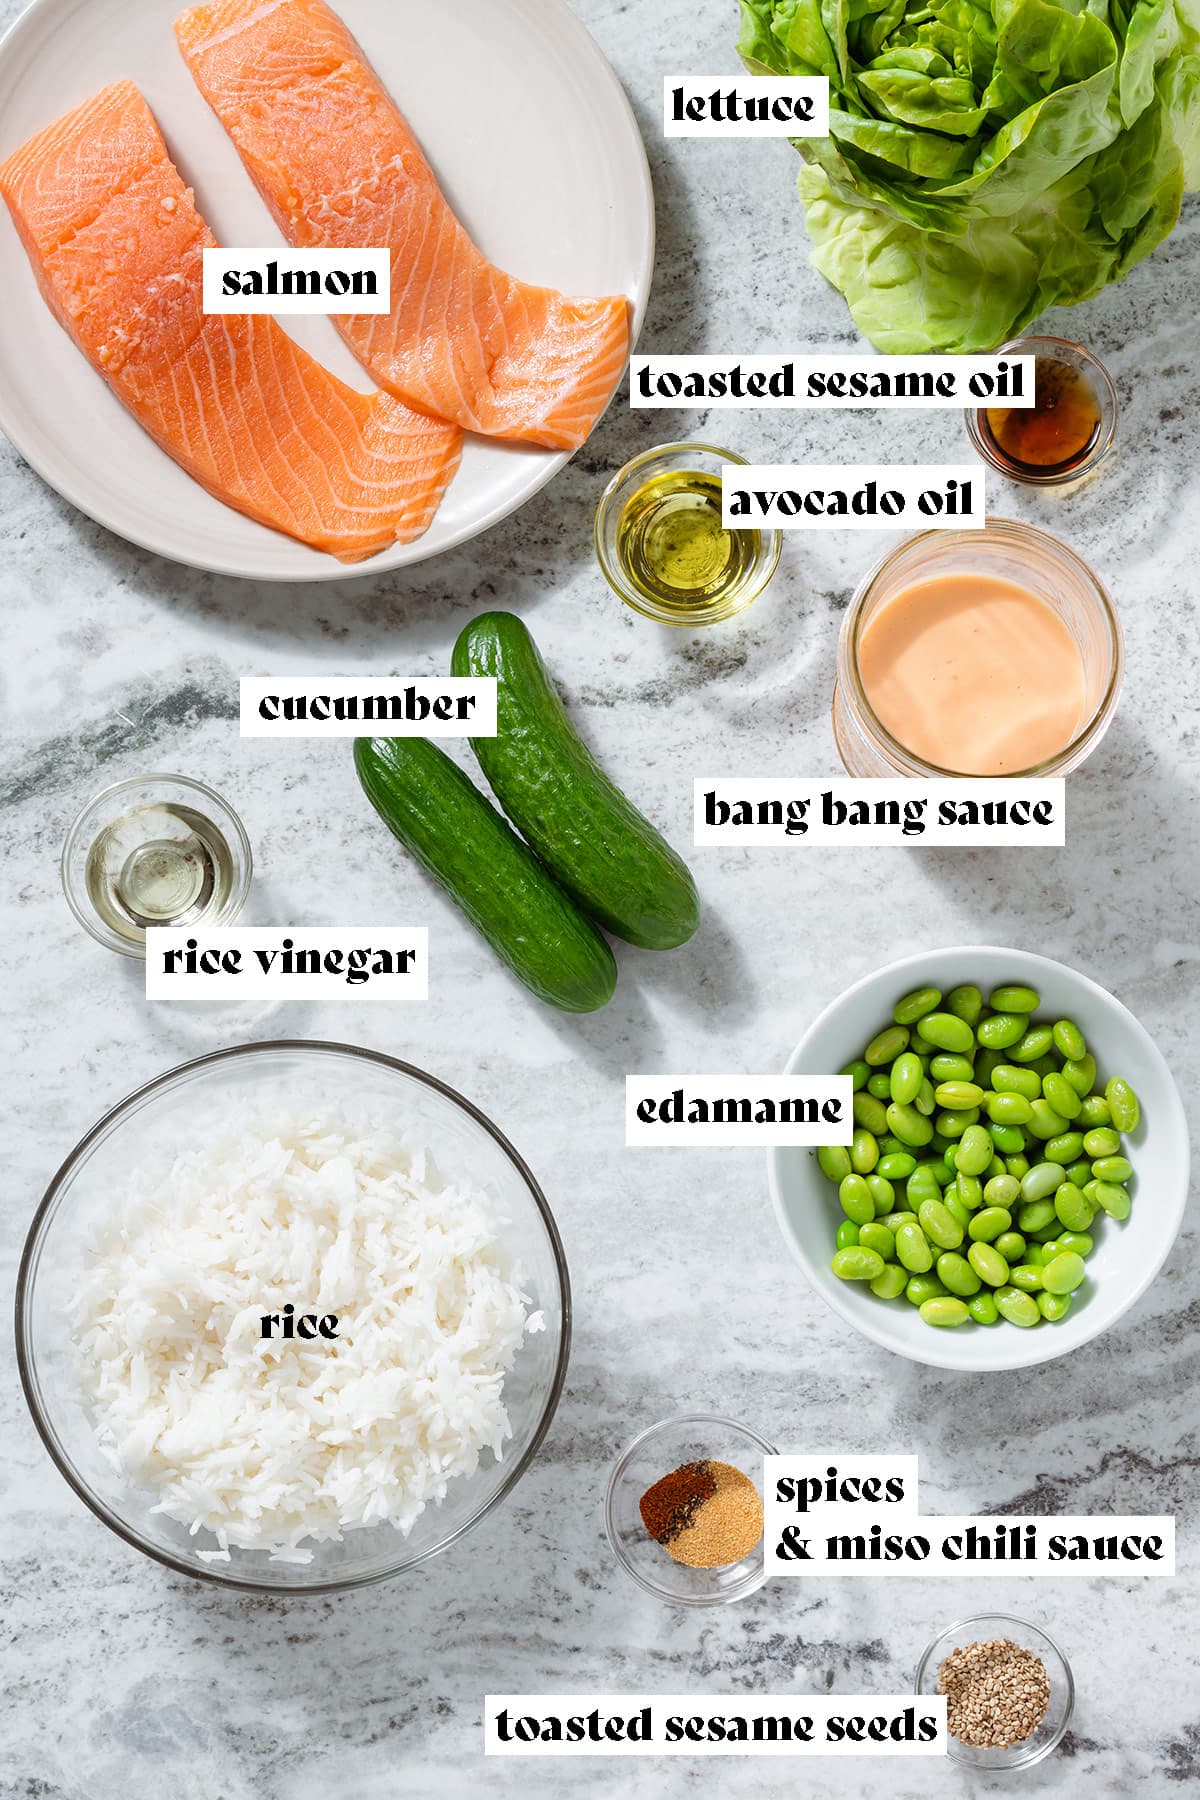 Ingredients in bowls like salmon, sauce cucumber, spices, rice, and edamame with text overlay.